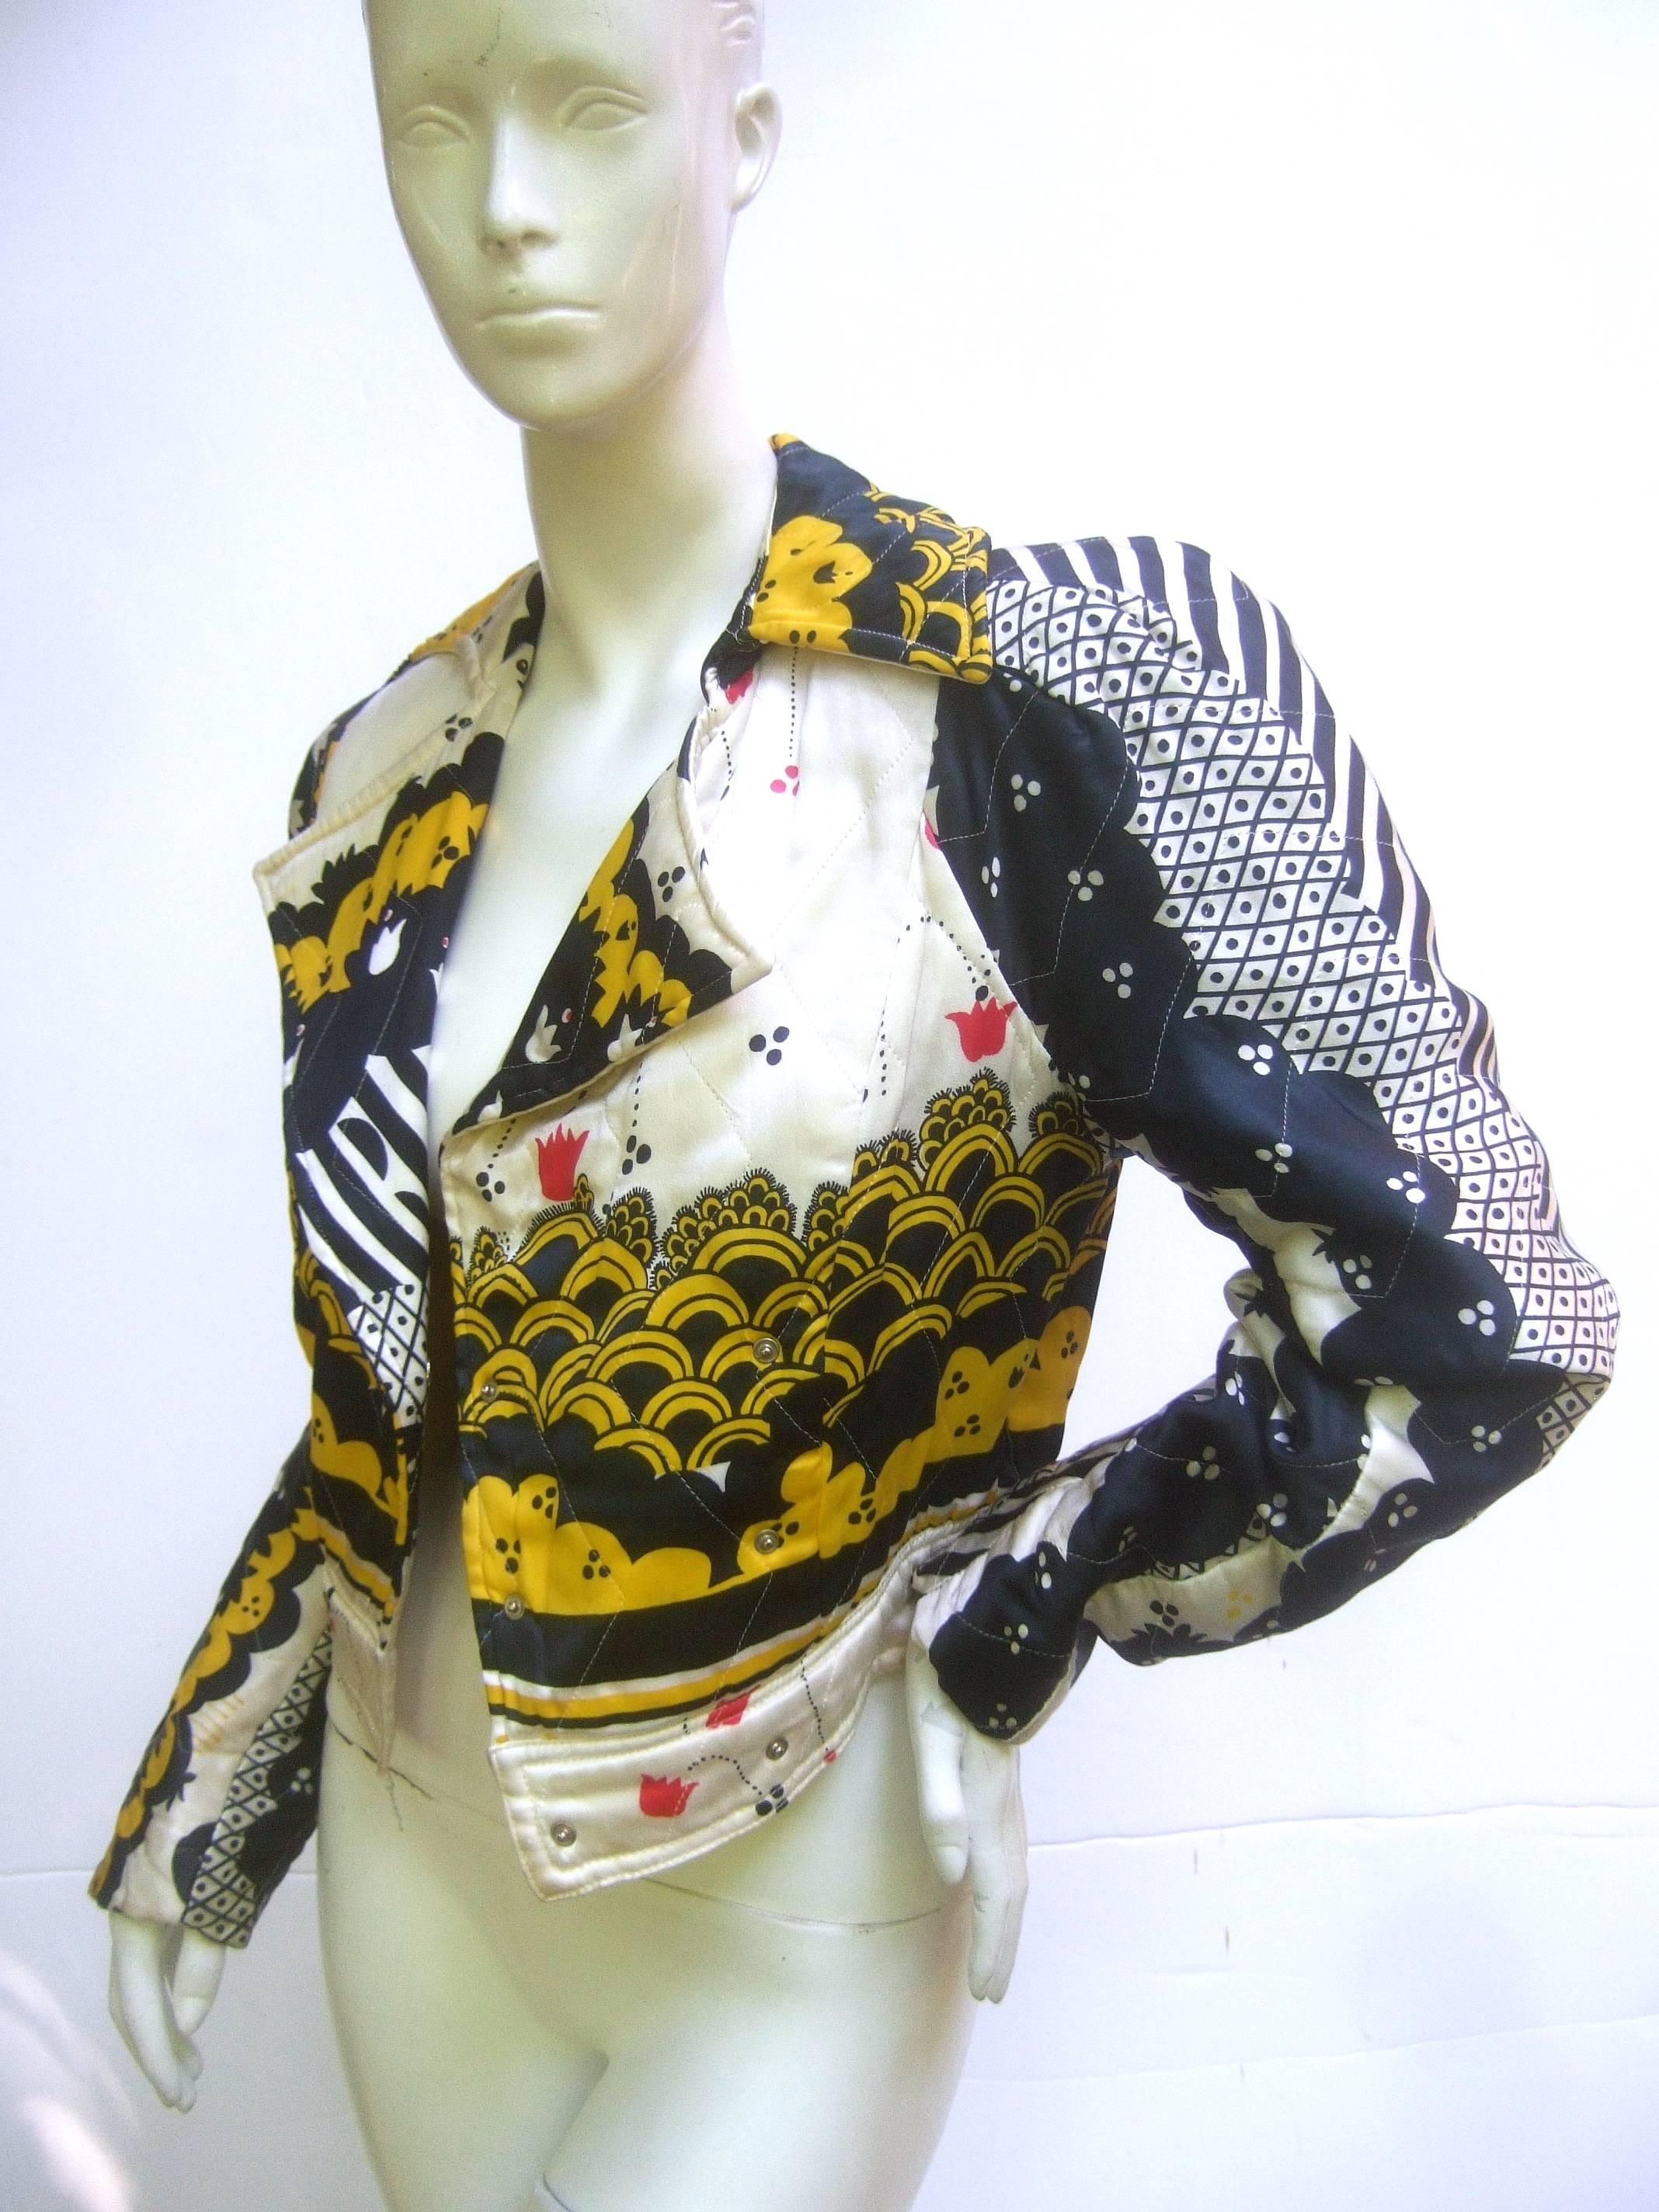 Ossie Clark quilted satin bomber jacket with Celia Birtwell fabric.
This is super rare! Don't miss it!  Pop snap buttons. Incredible romantic puffed sleeves contrast with sharp tailoring and disco style lapels. Historically, this is such an